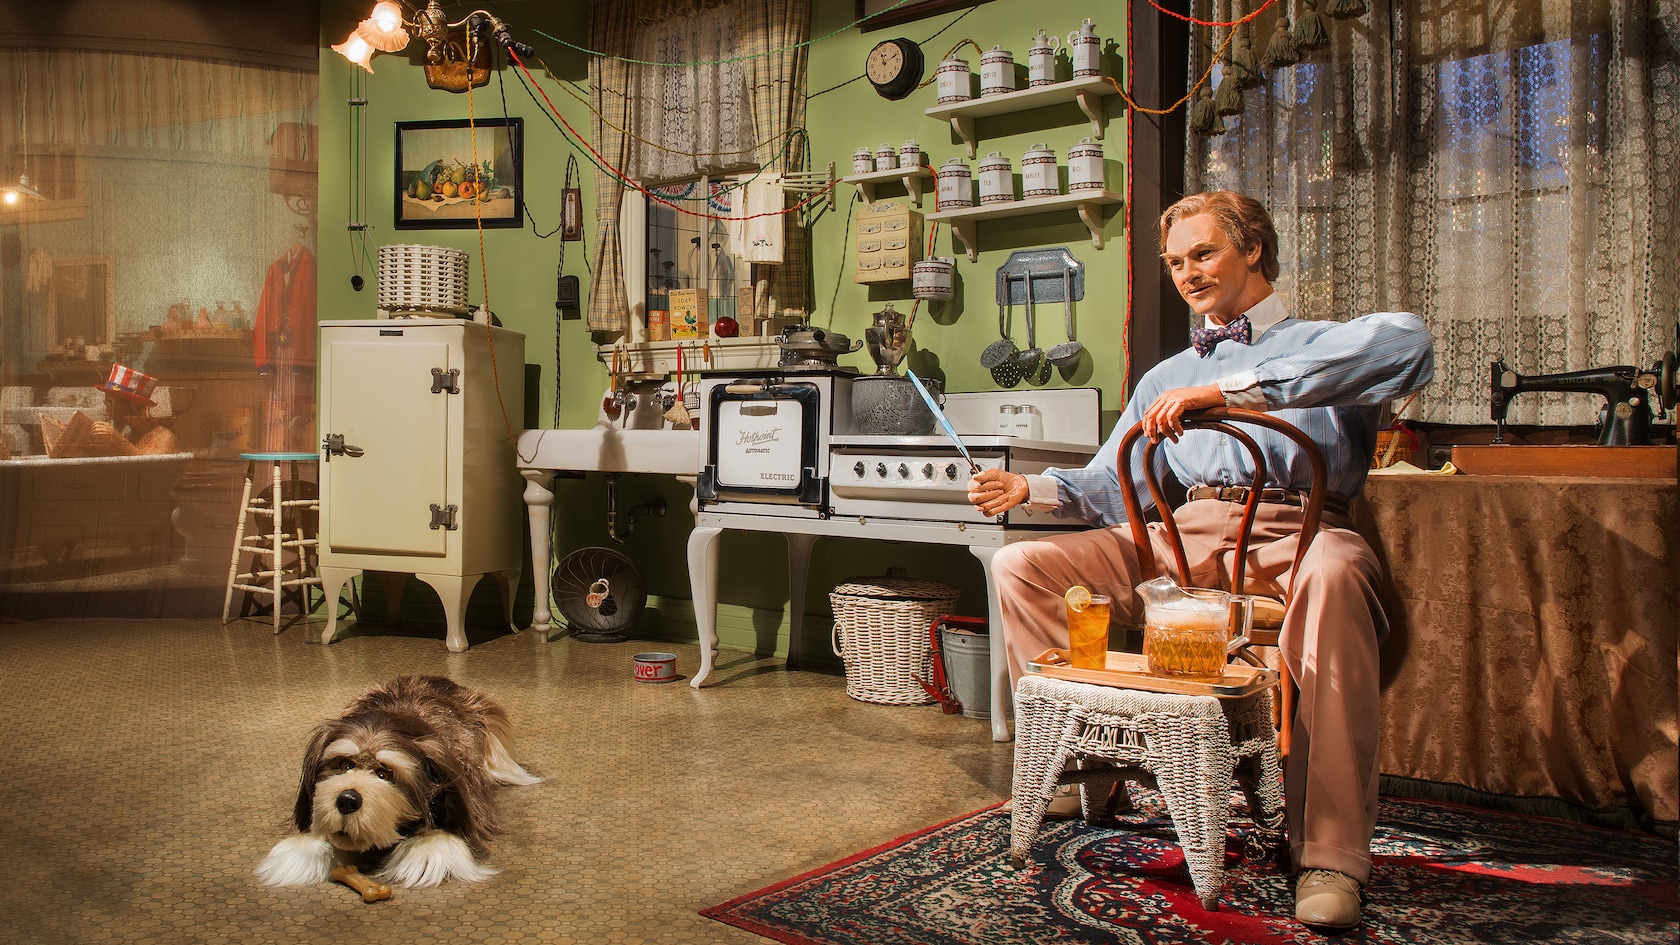 An Audio-Animatronic man and dog sit in a house with the latest conveniences of the 1920s